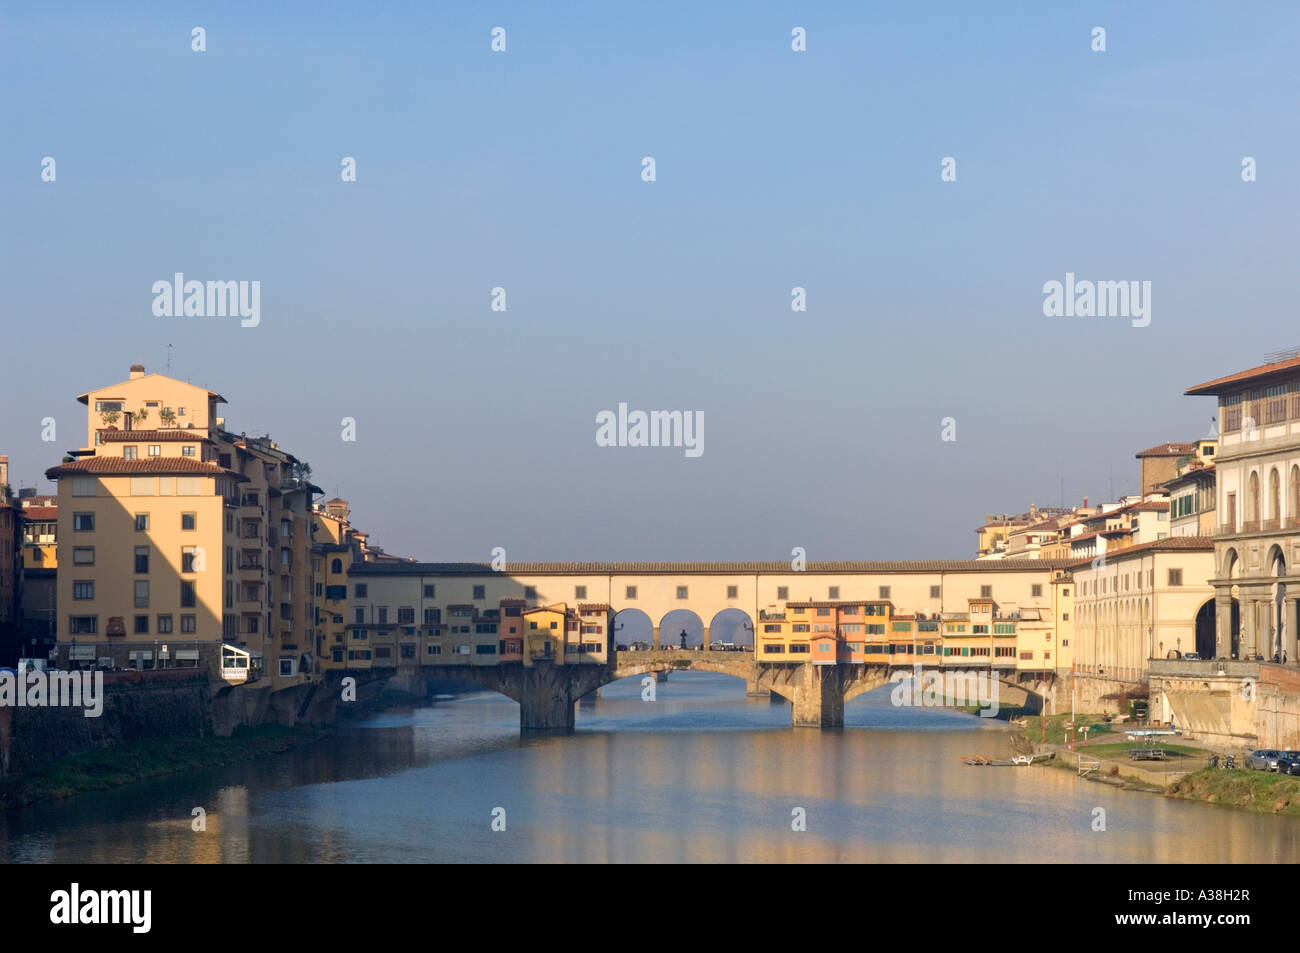 A wide view of the Ponte Vecchio bridge across the Arno river in Florence on a sunny day. Stock Photo